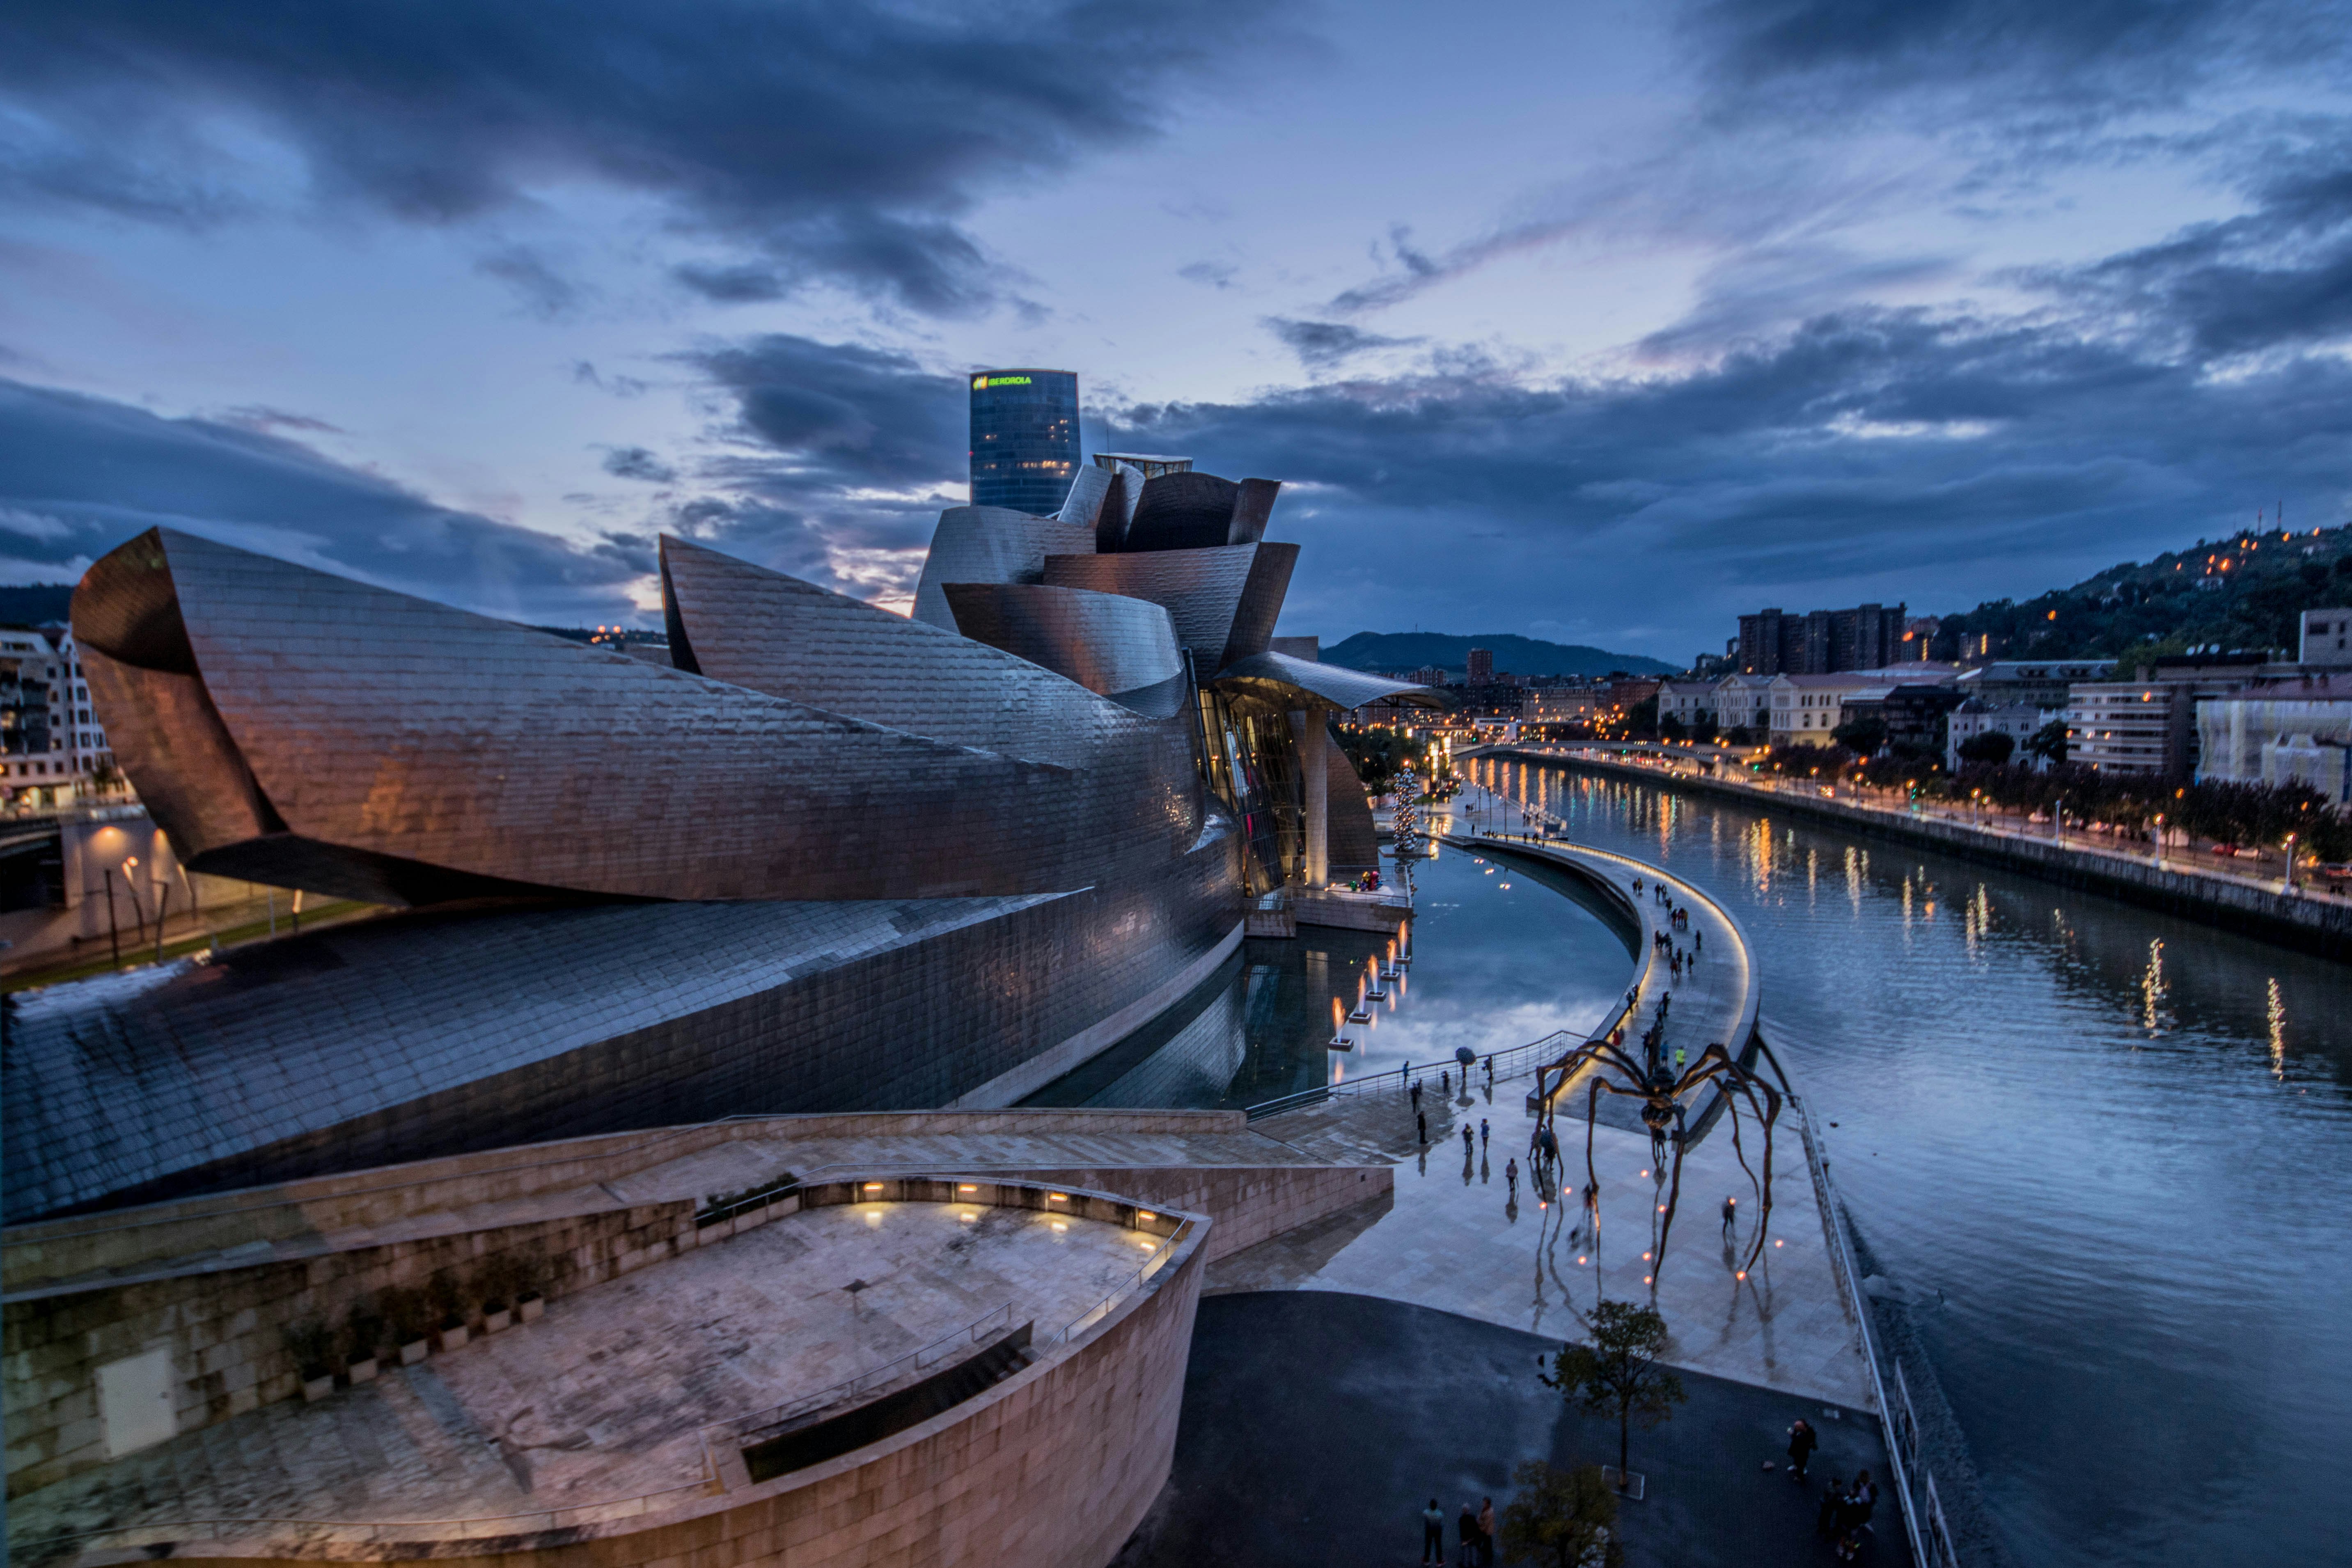 A view of Museo Guggenheim Bilbao from above, resembling a titanium ship.